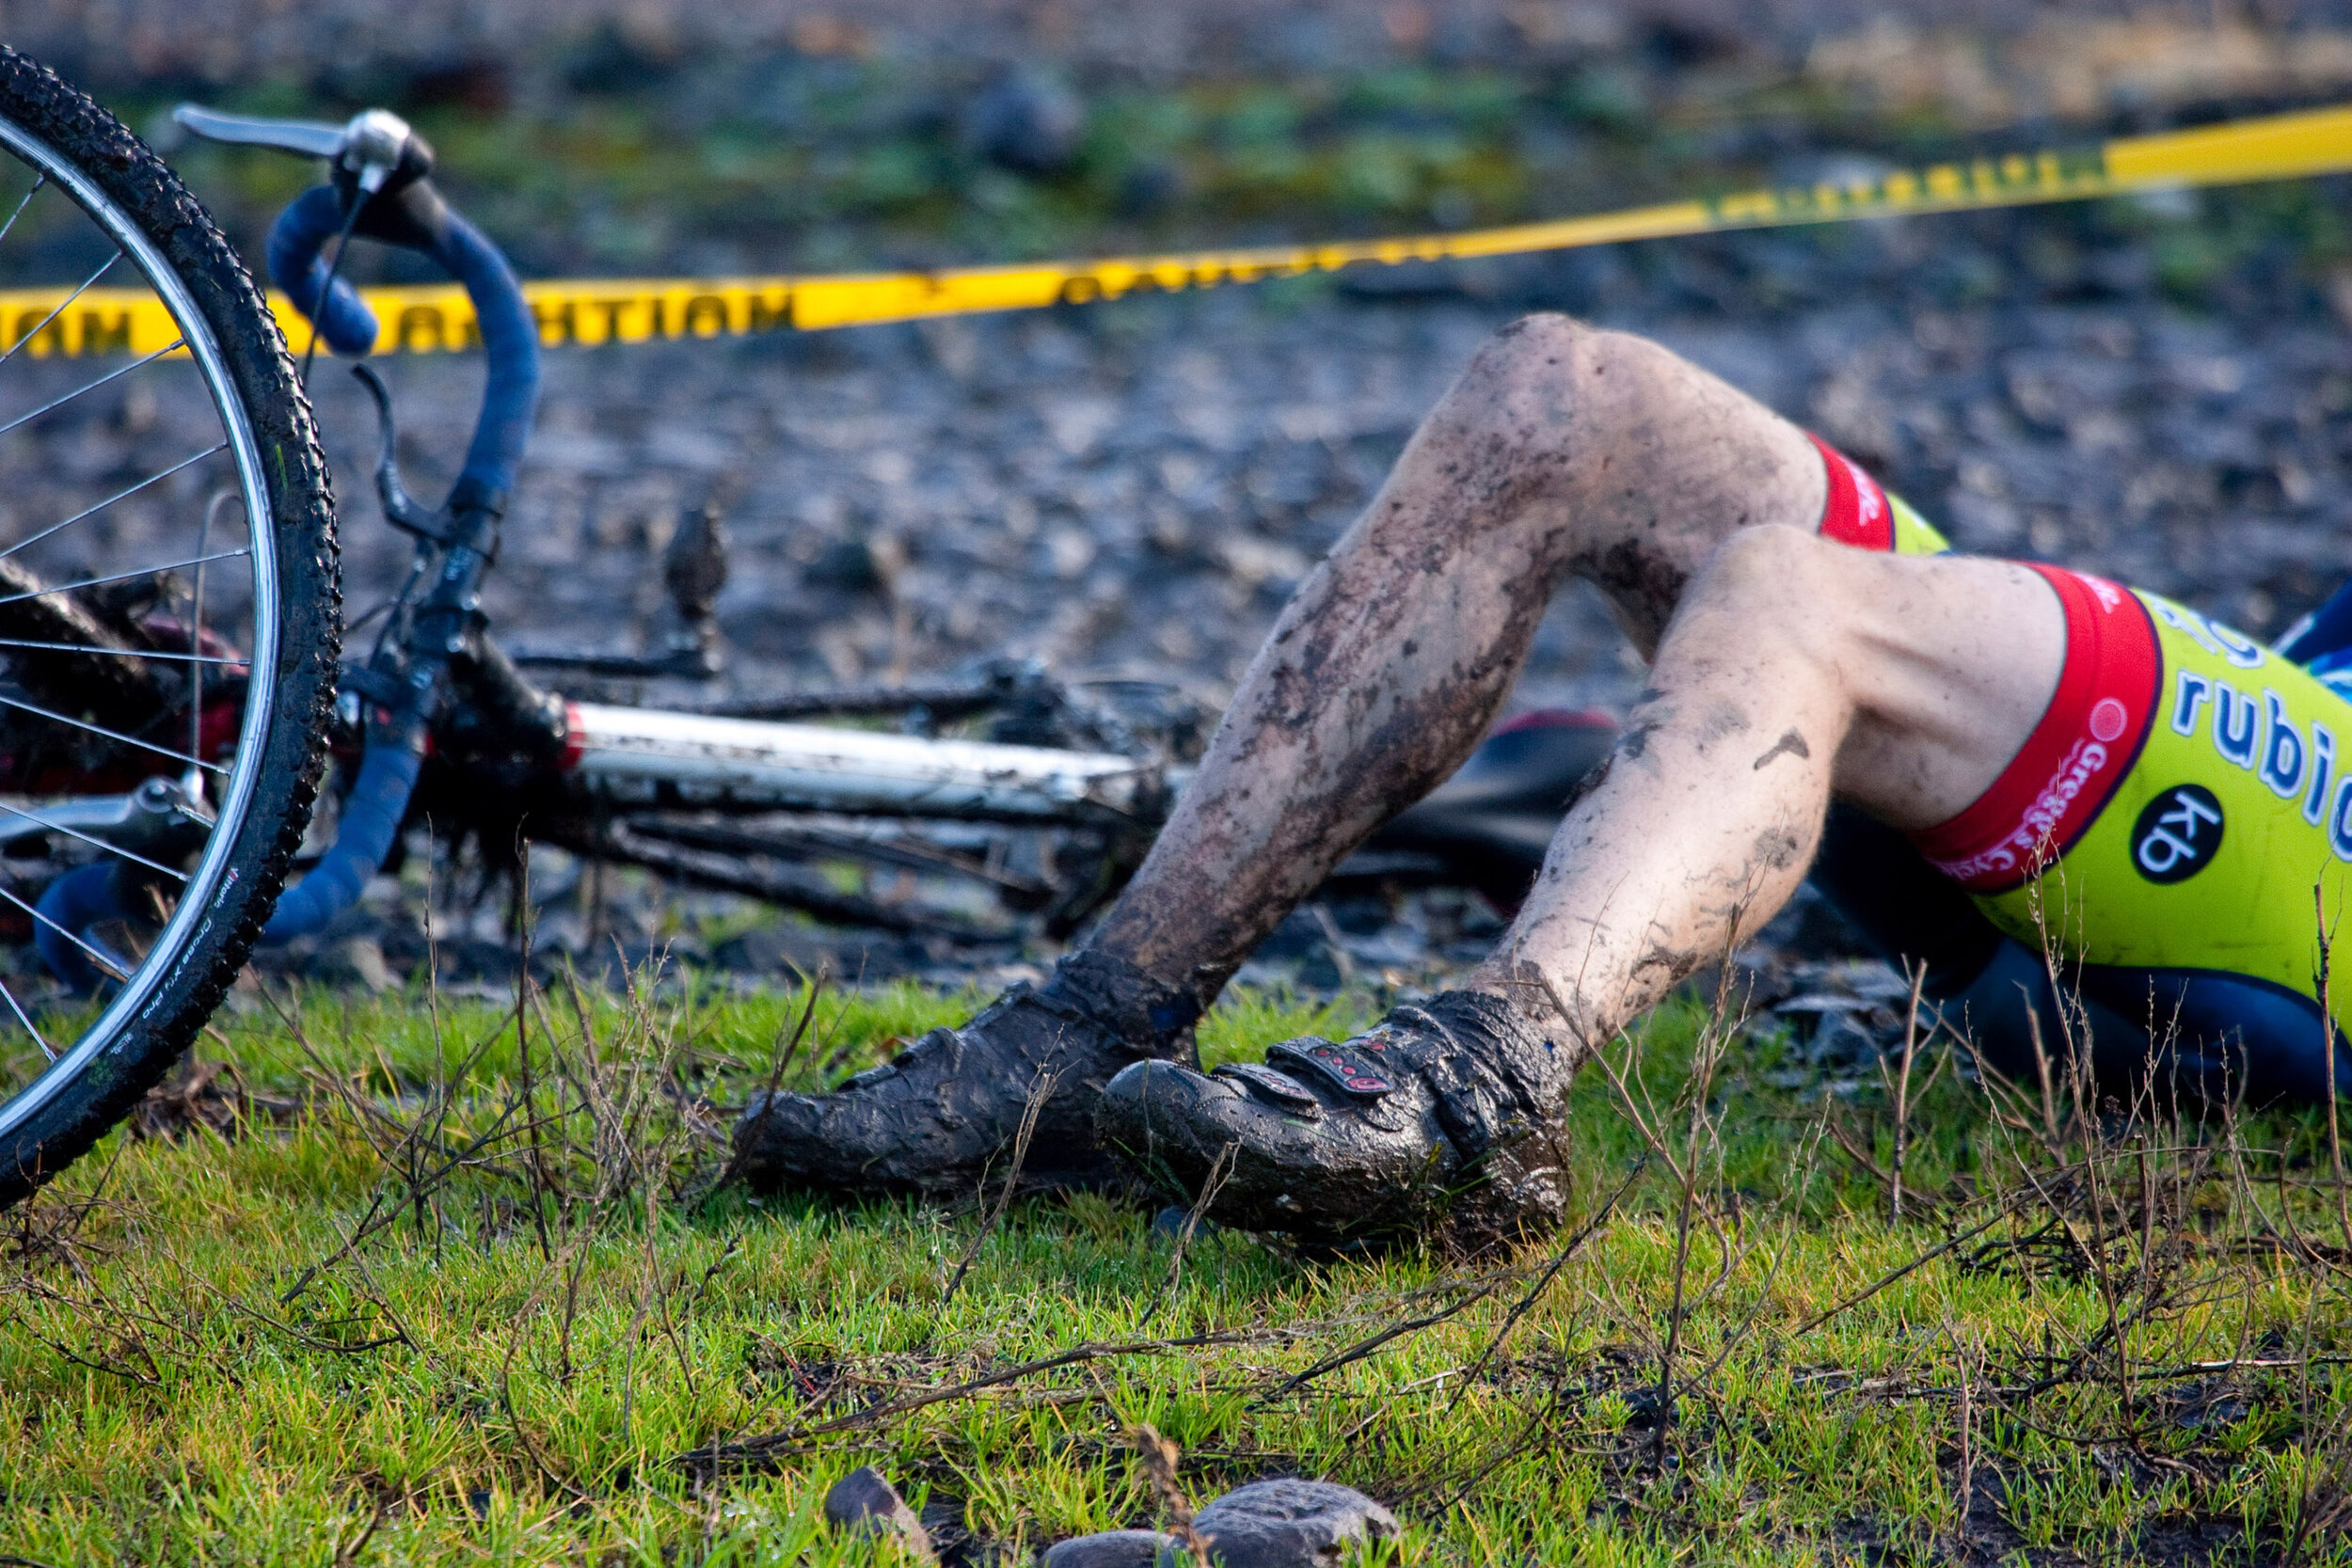  Competition: Cyclocross racers during a race, Washington 